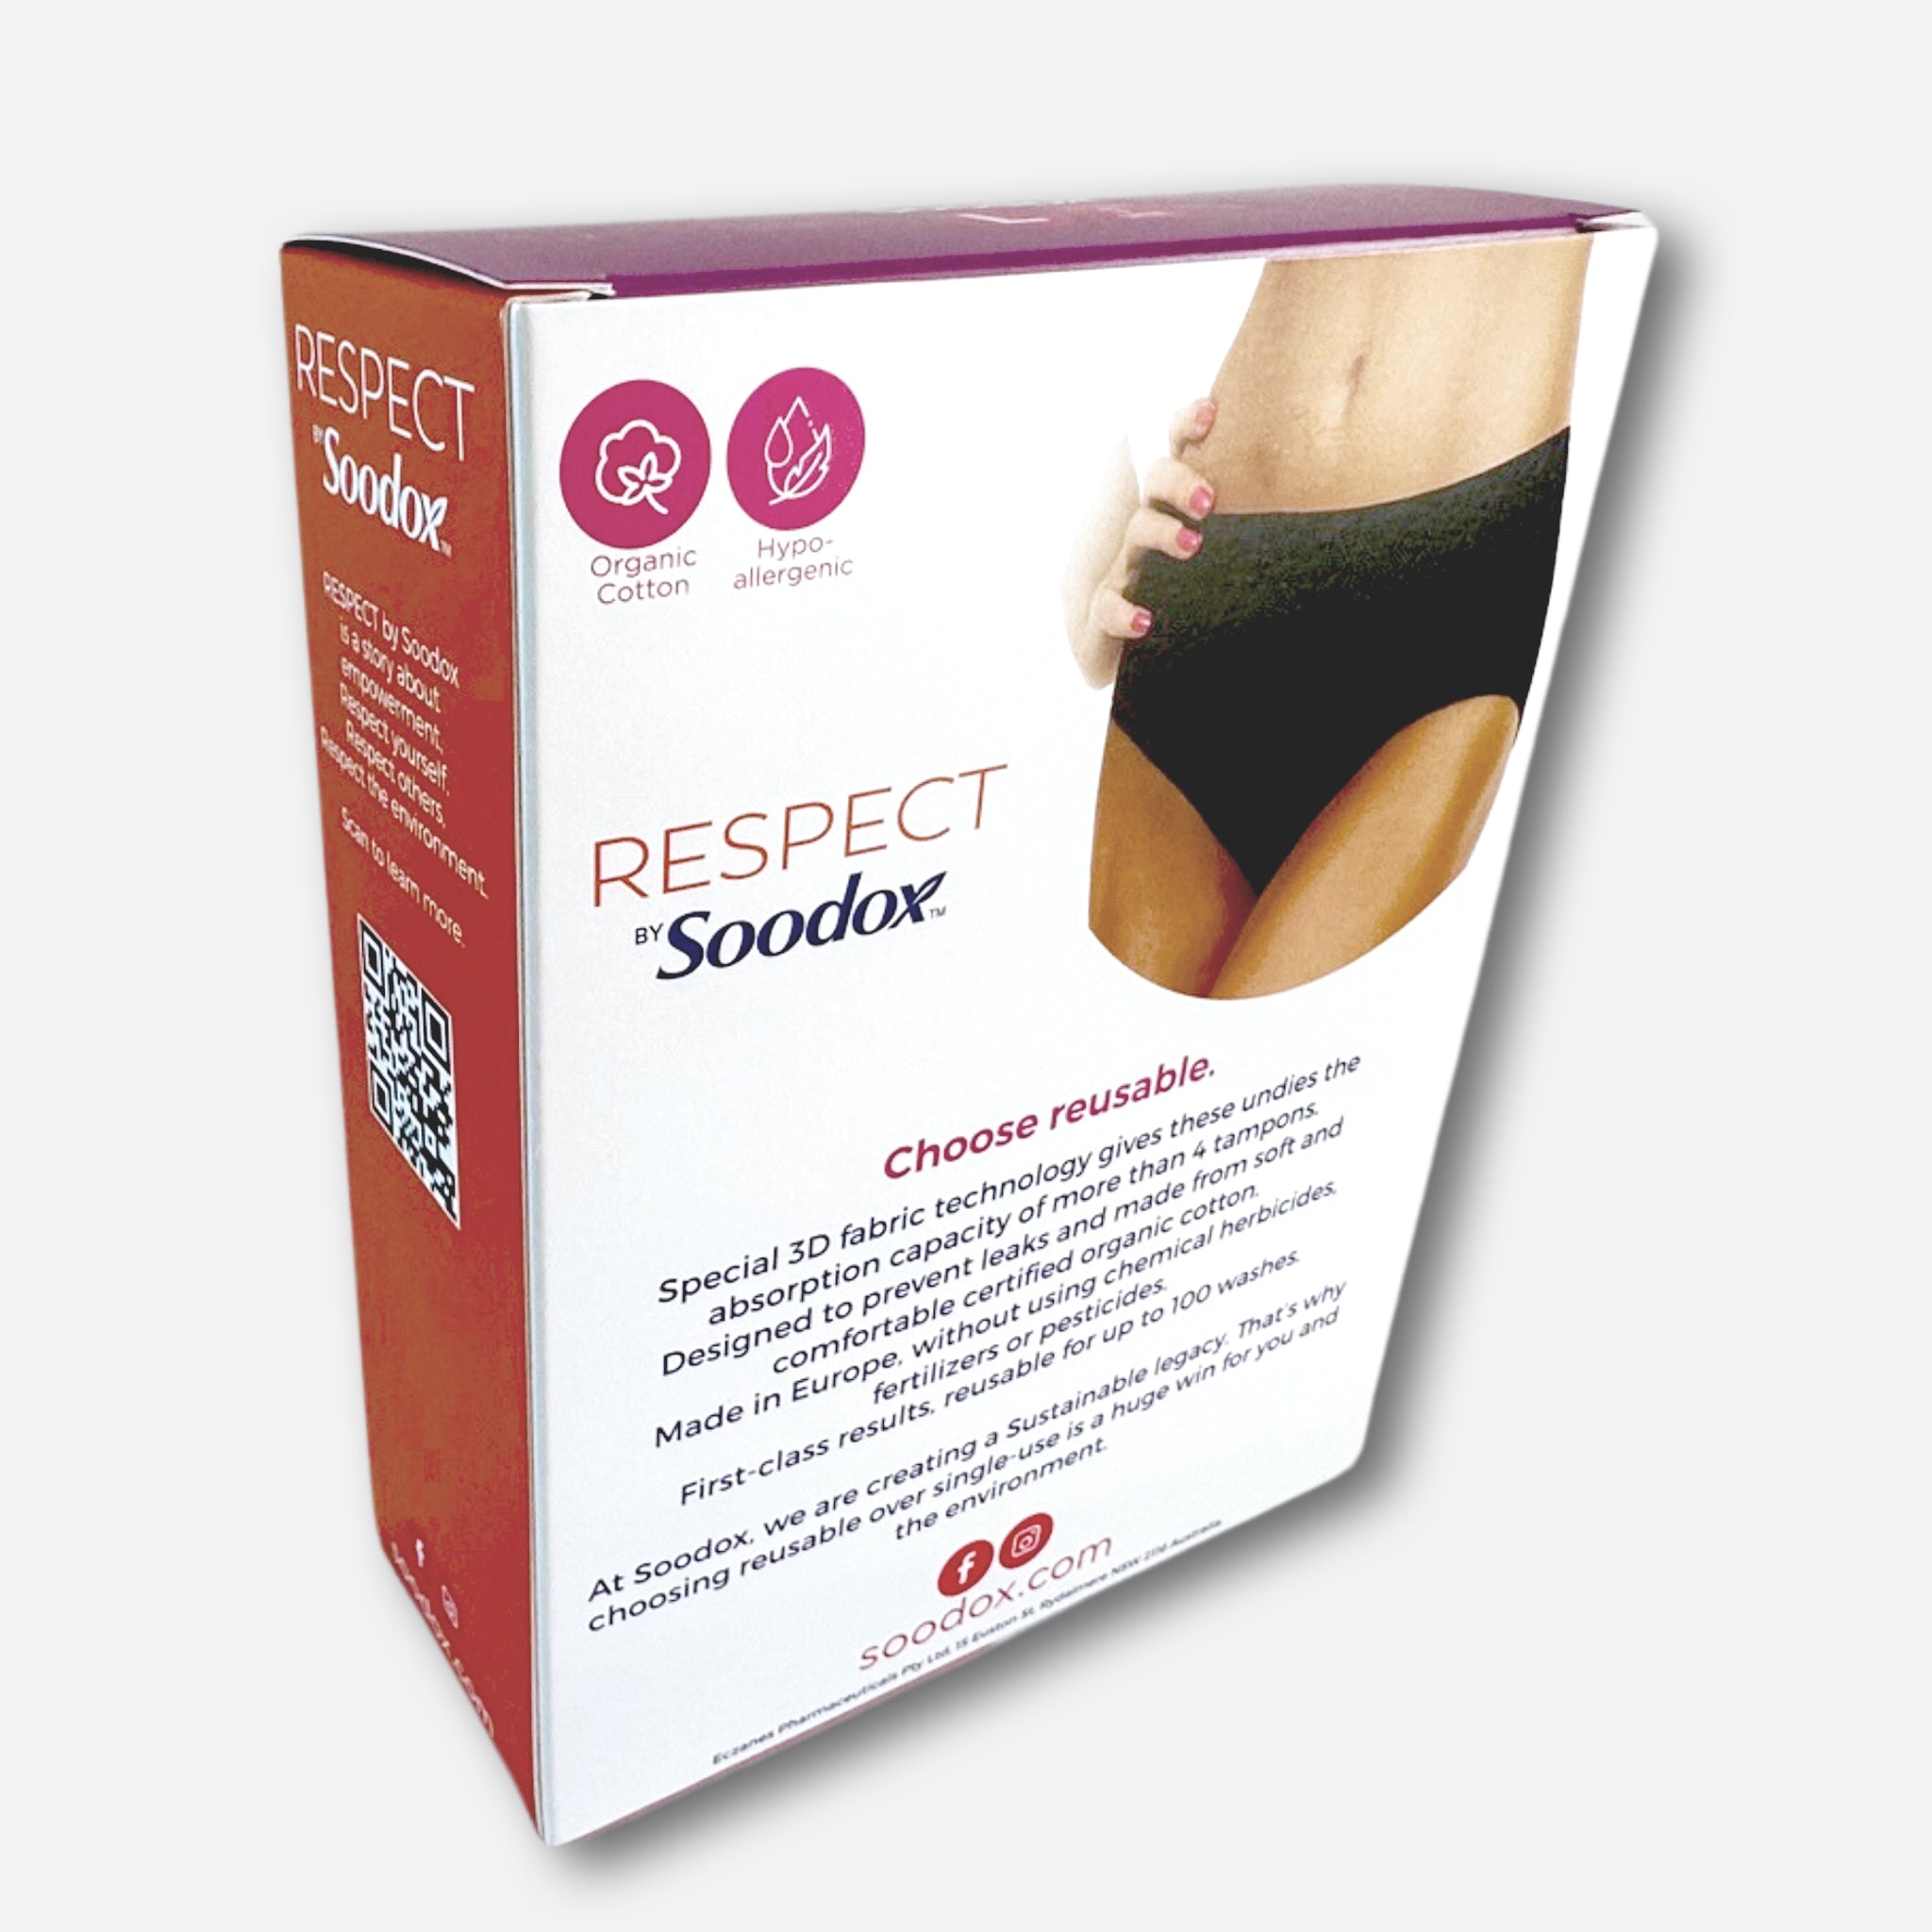 RESPECT BY Soodox™ Period Organic Cotton Undies Large